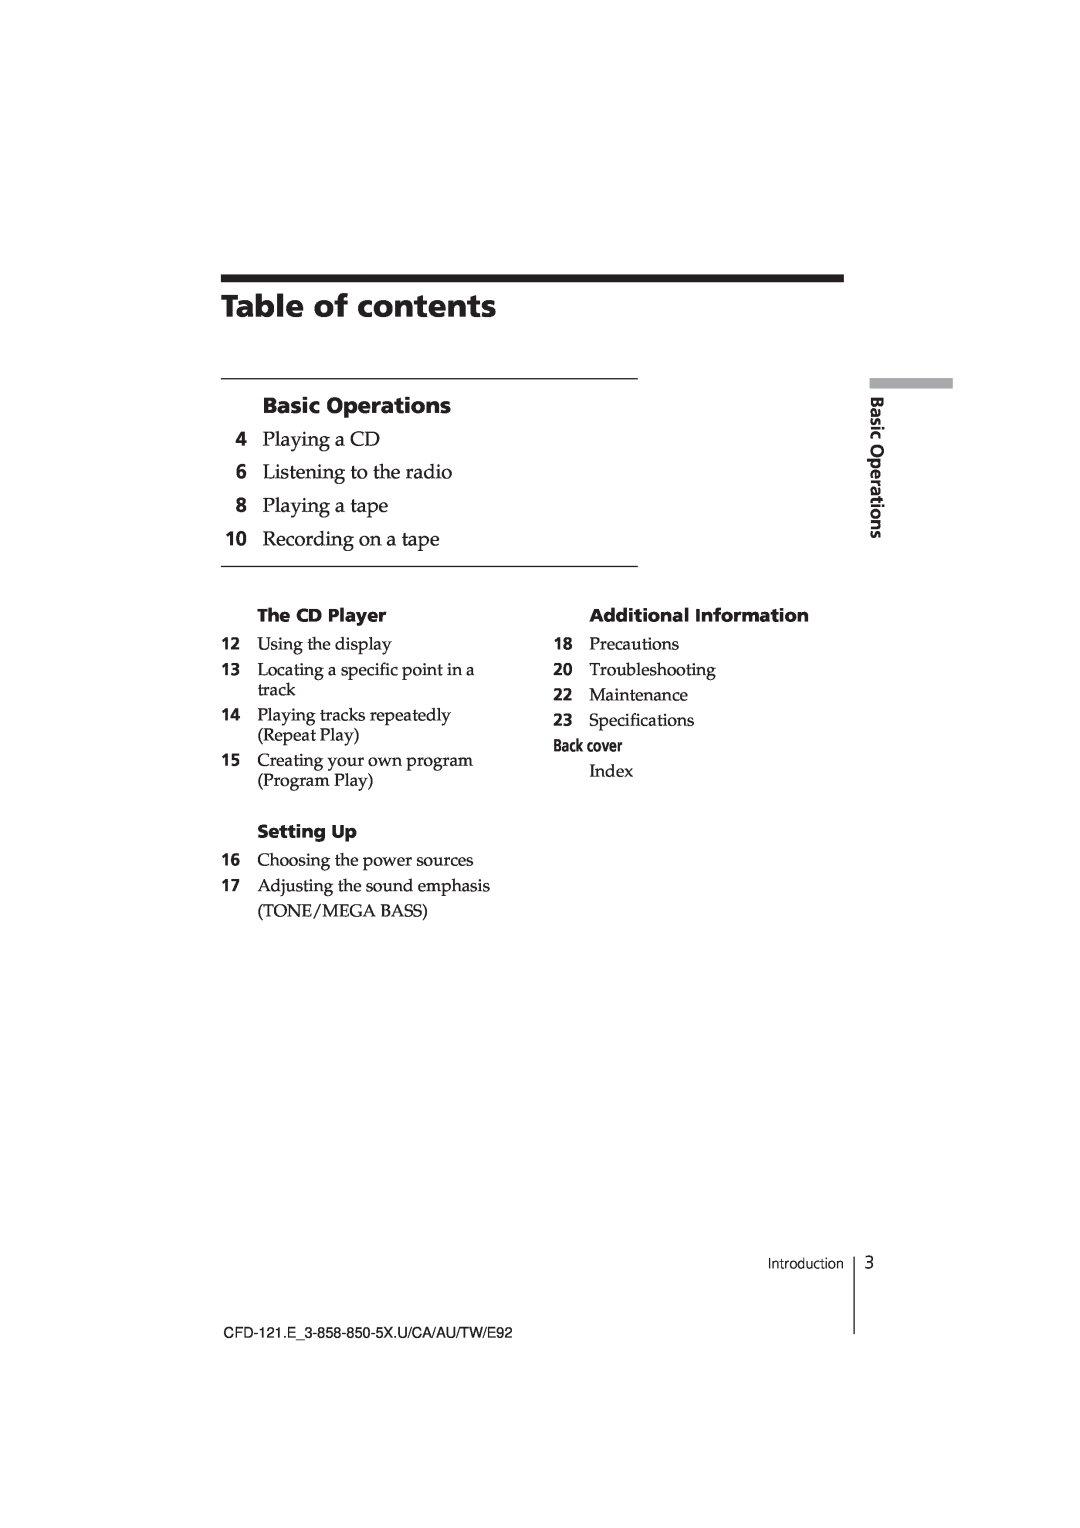 Sony CFD-121 manual Table of contents, Basic Operations, The CD Player, Additional Information, Back cover, Setting Up 